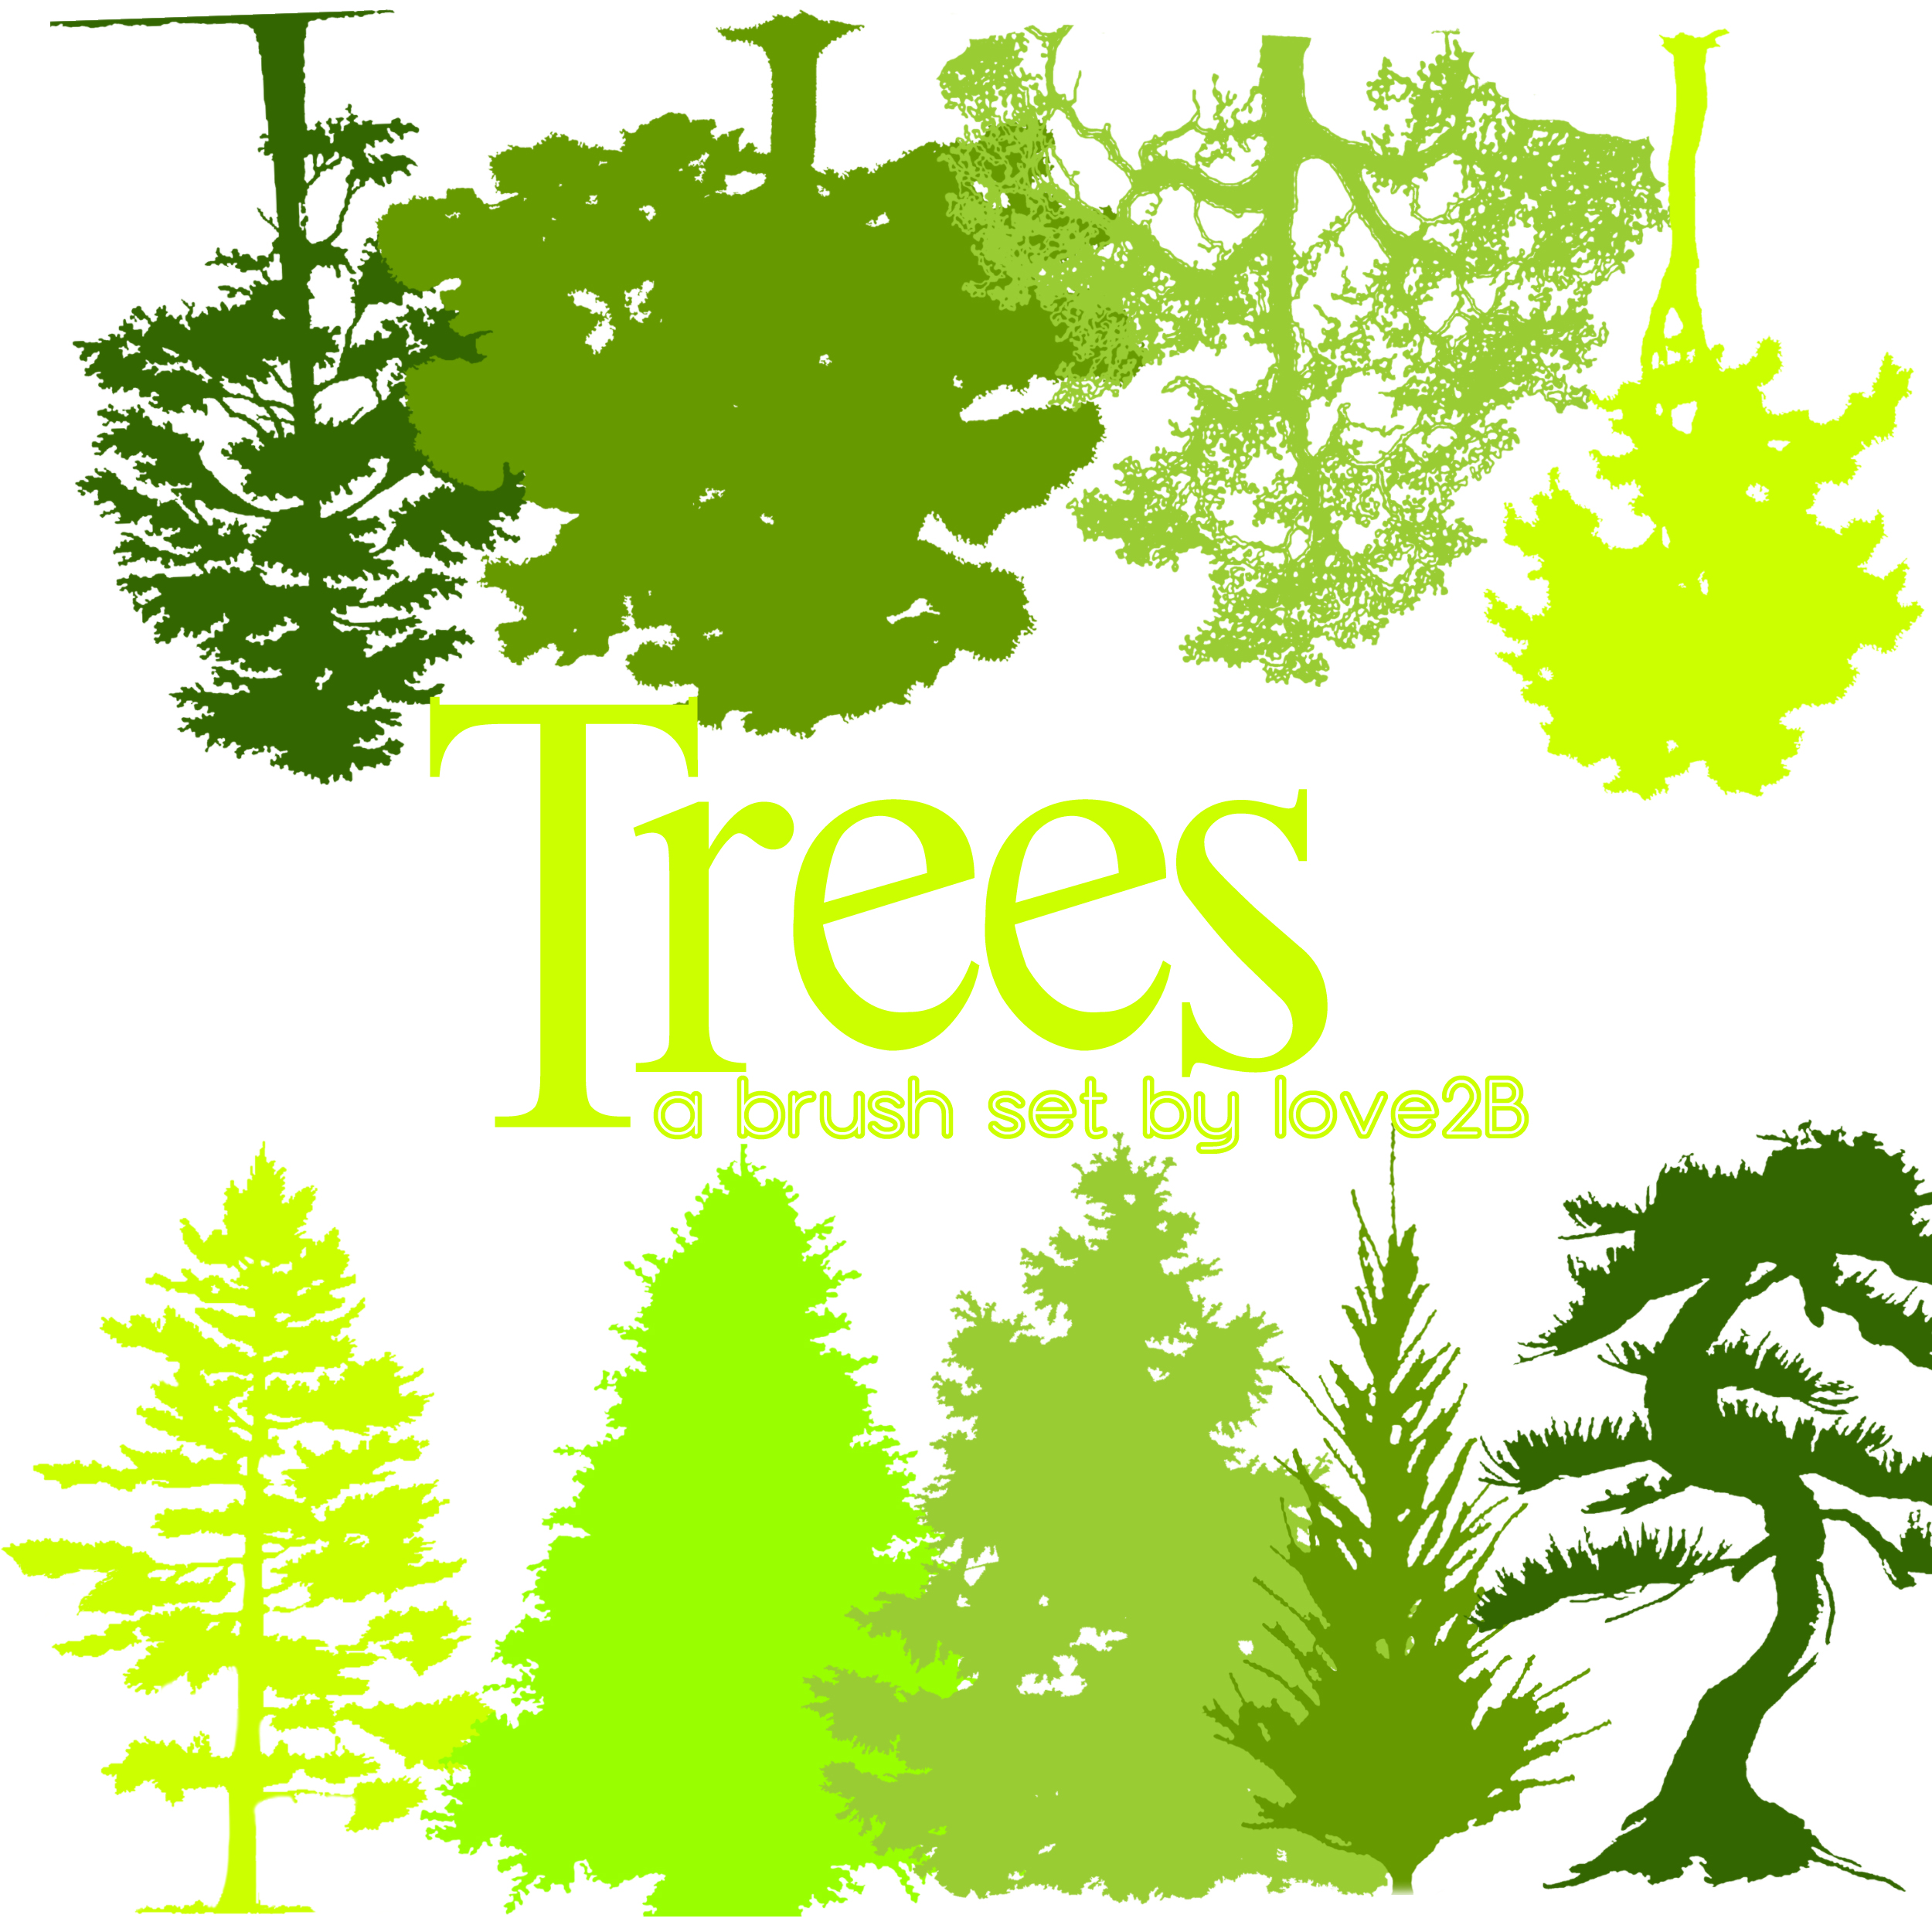 photoshop tree brushes free download